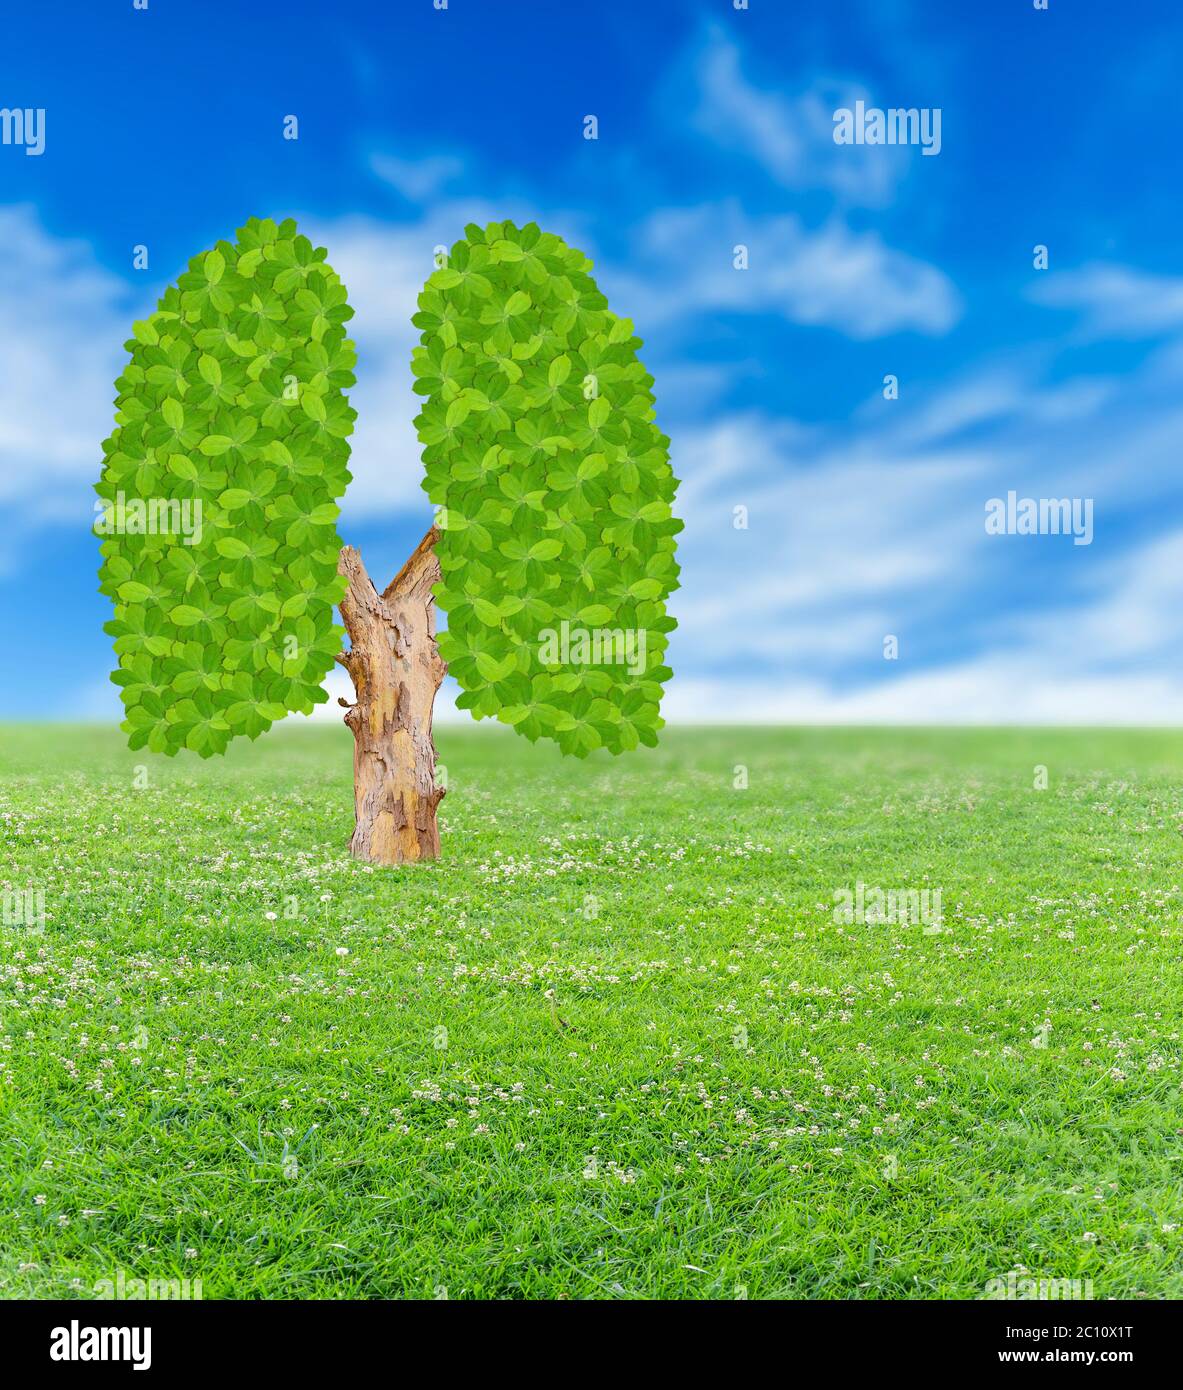 Green tree in lungs shape made from leaves on greem lawn and sky bakground Stock Photo